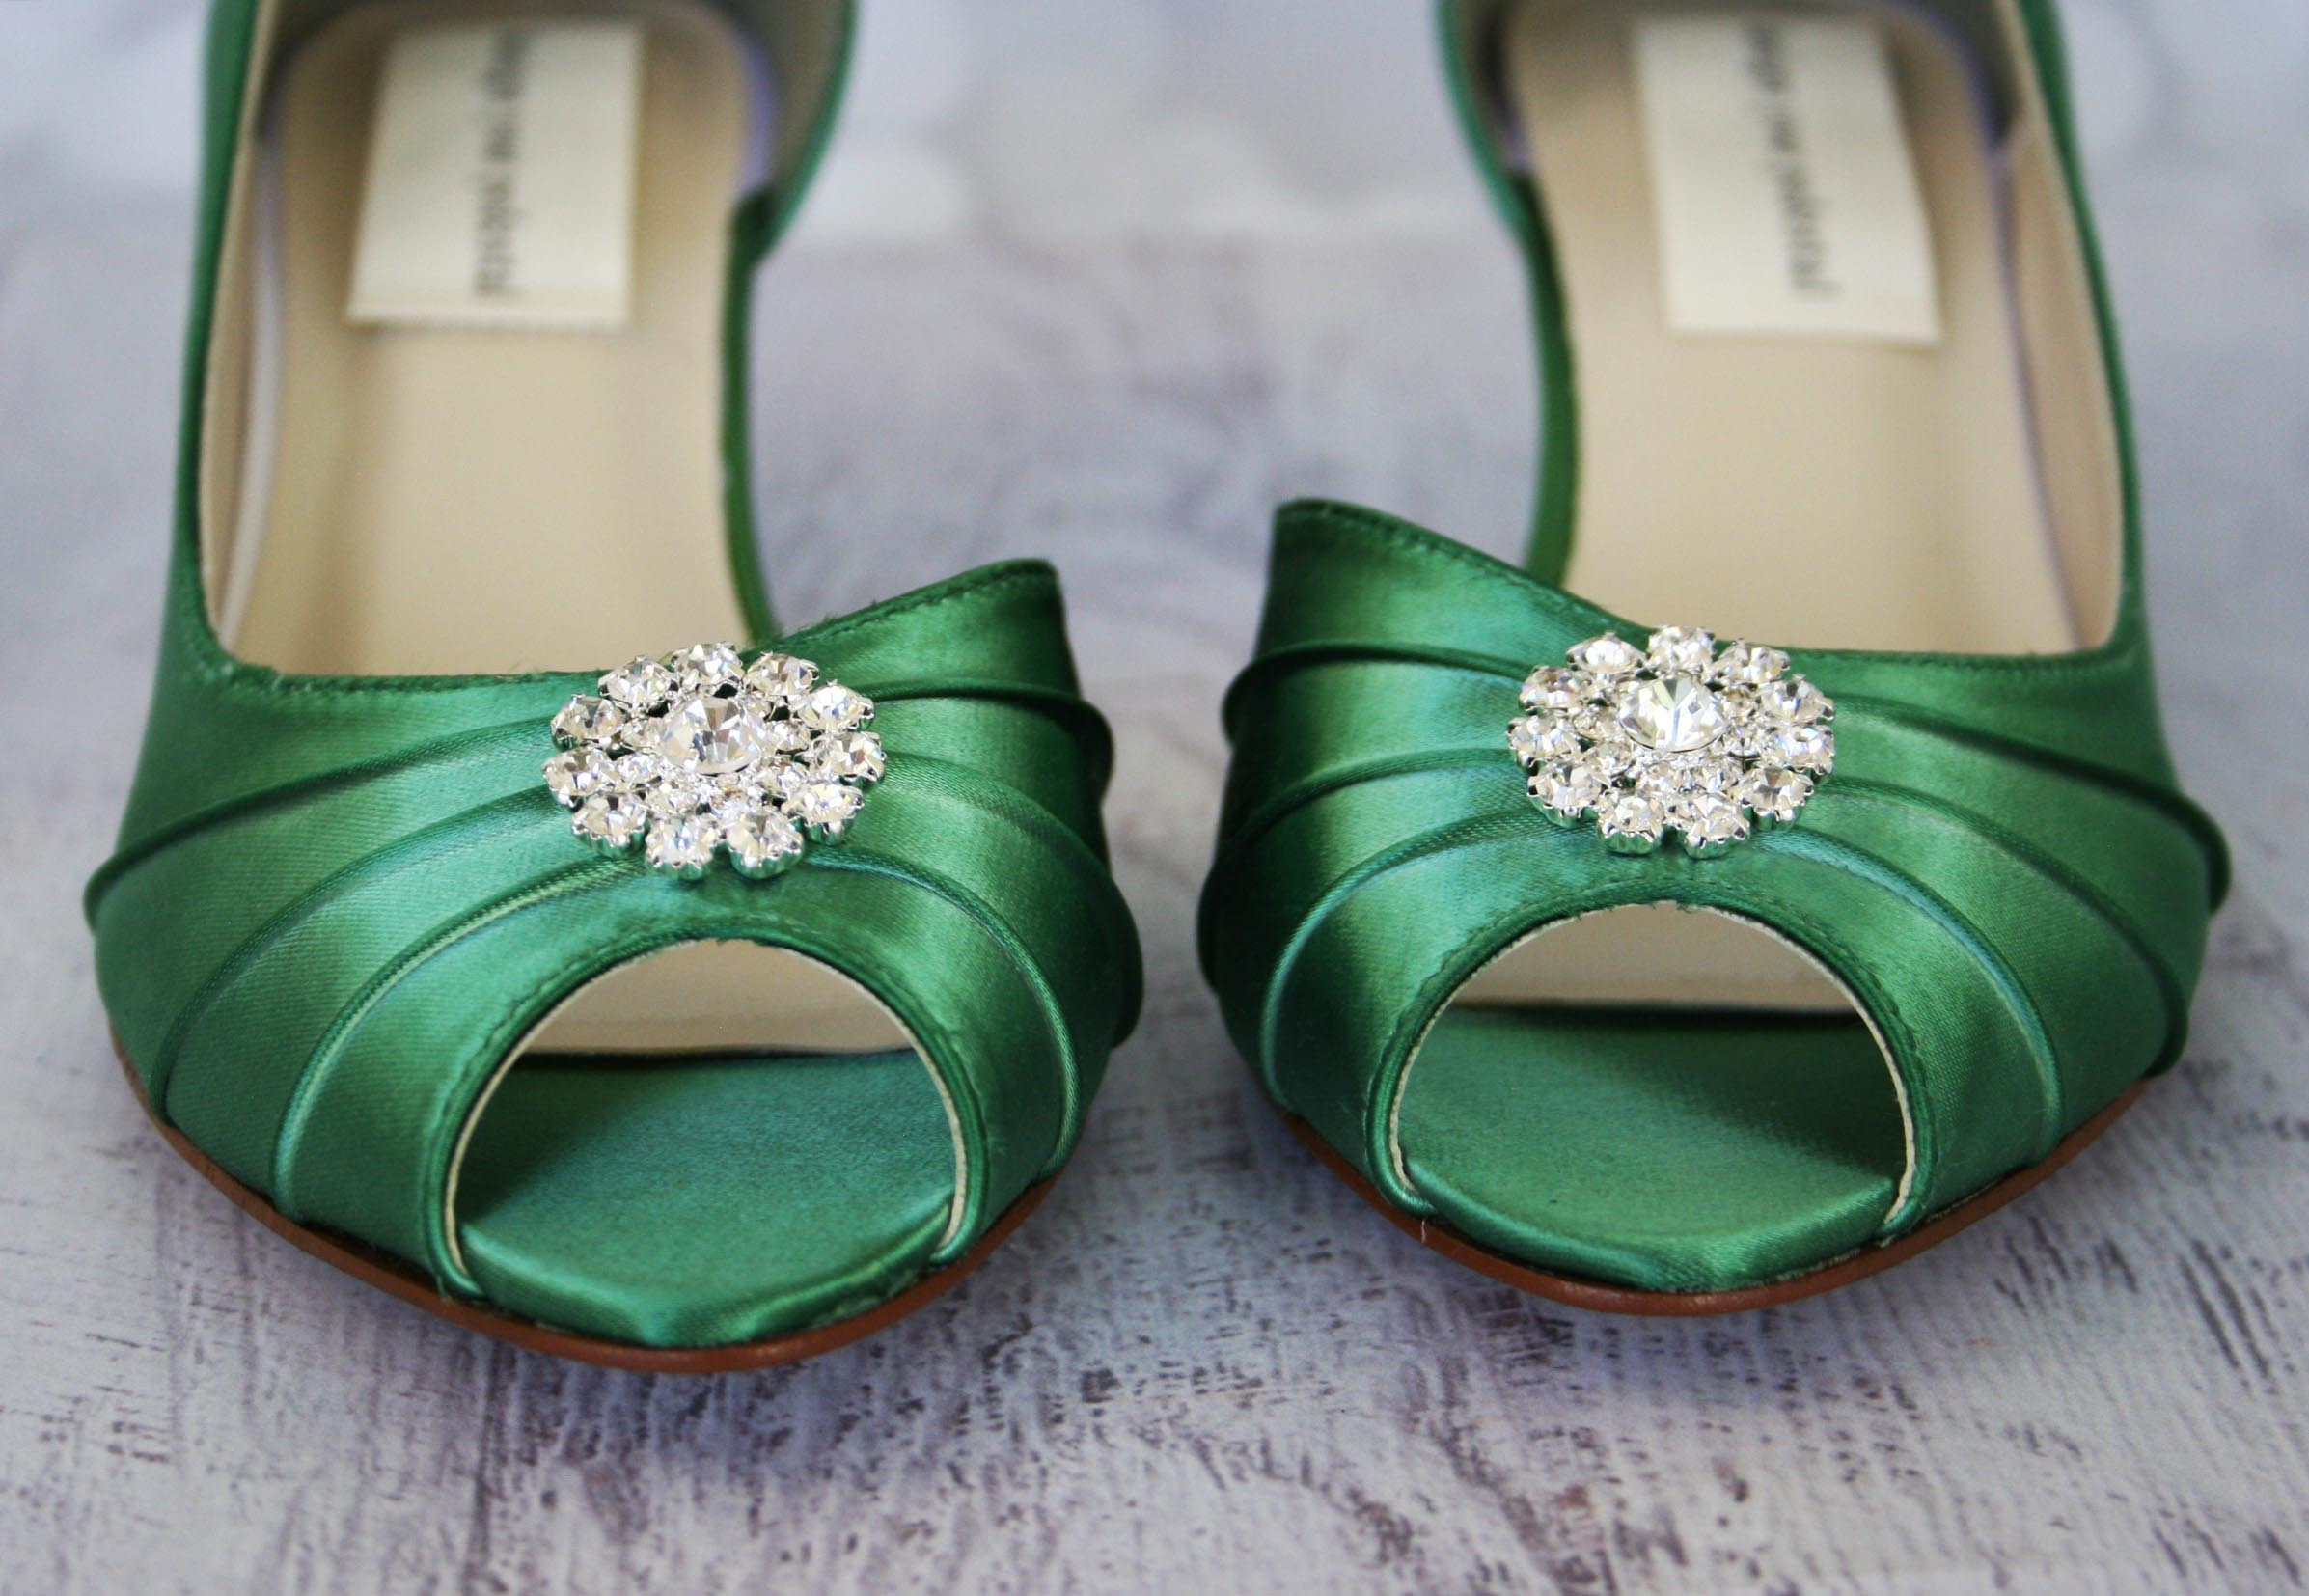 Green Shoe Wedding
 Green With Envy How to Make Them Jealous with Green